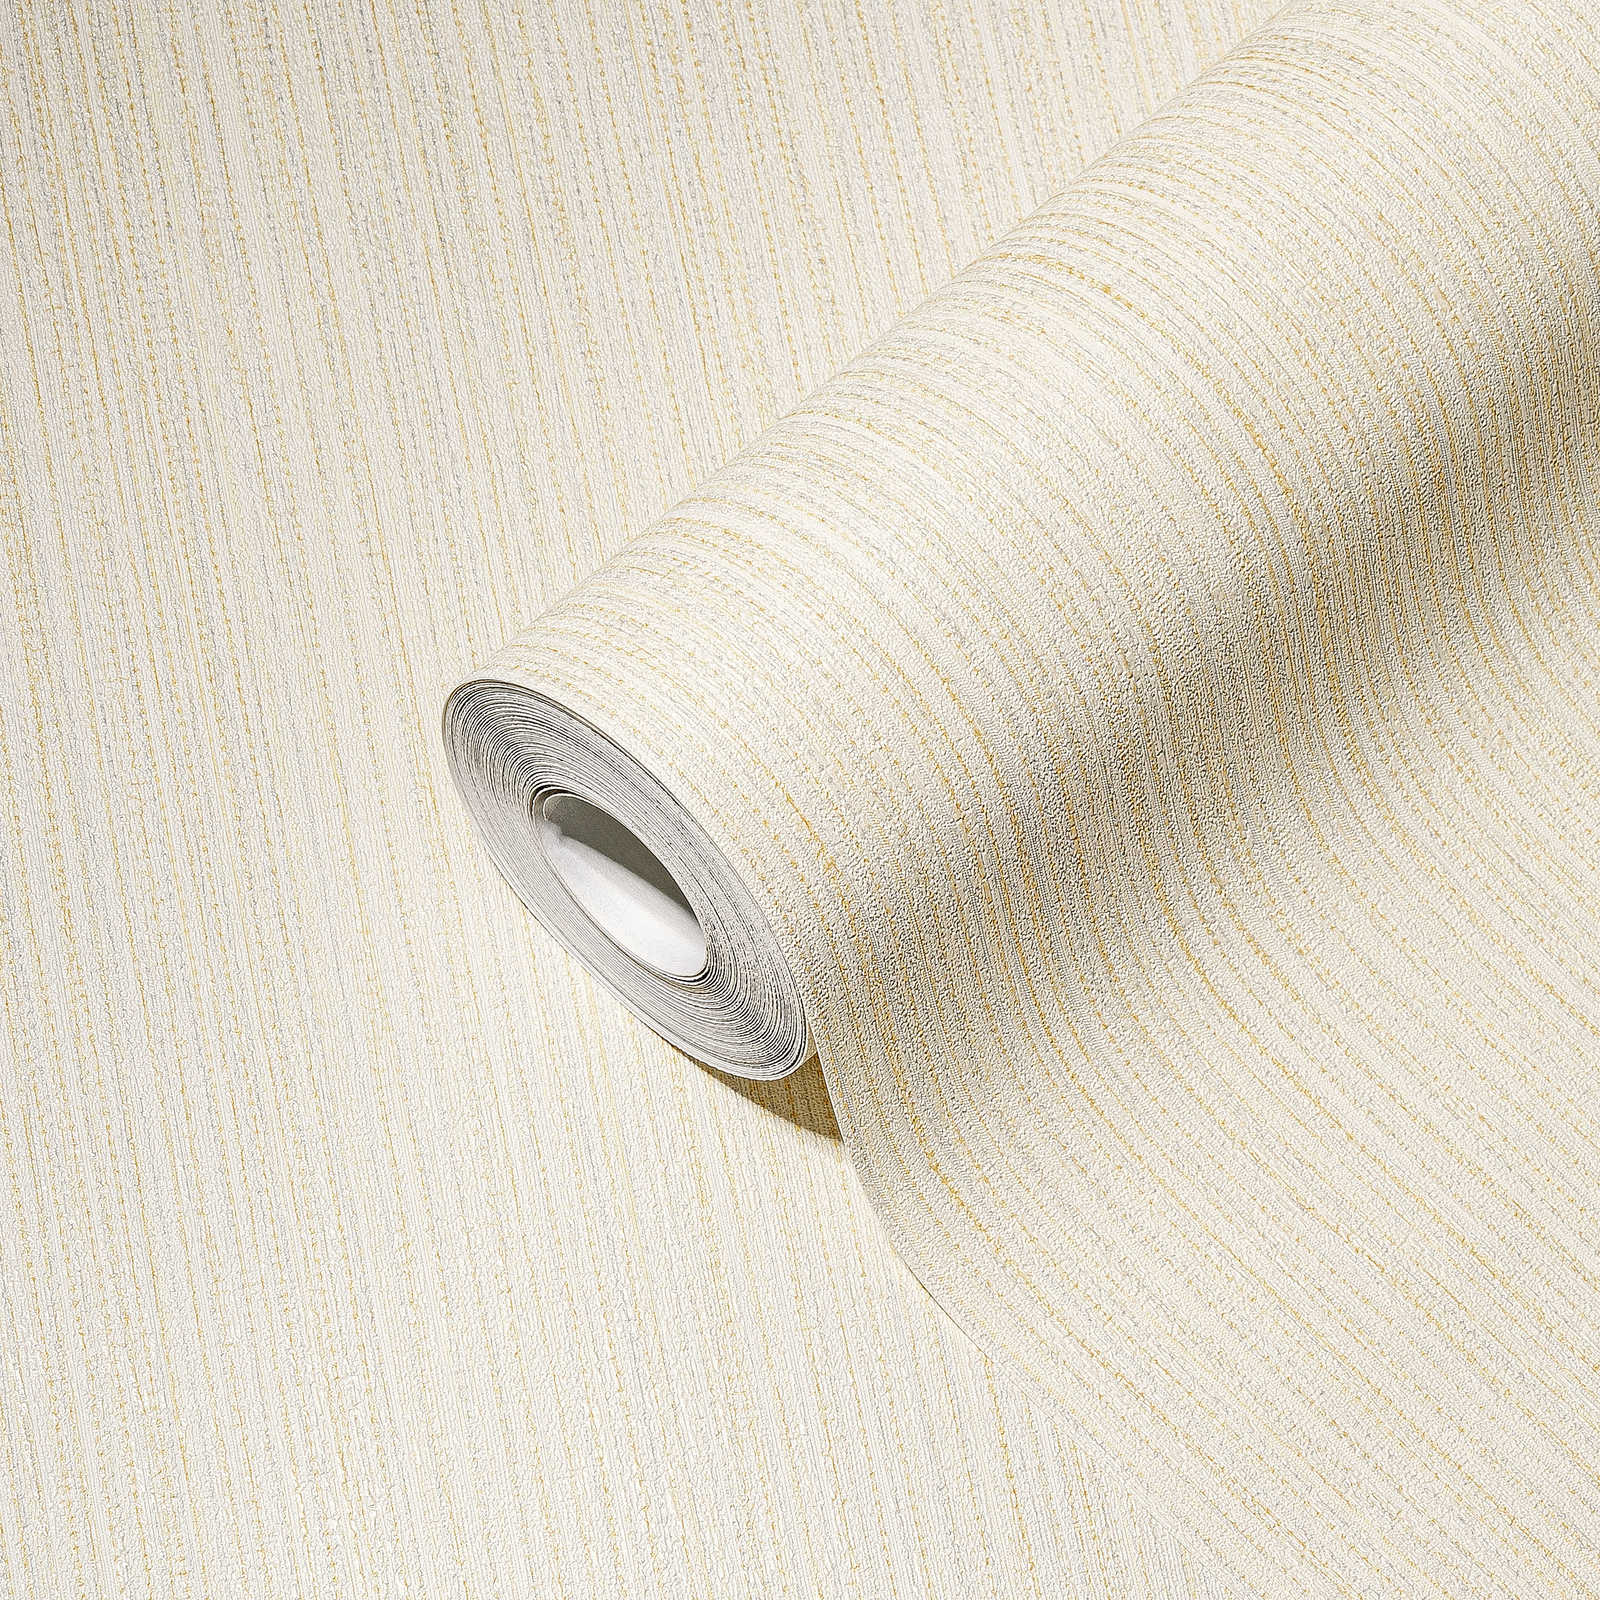             Plain wallpaper ivory with line texture - cream
        